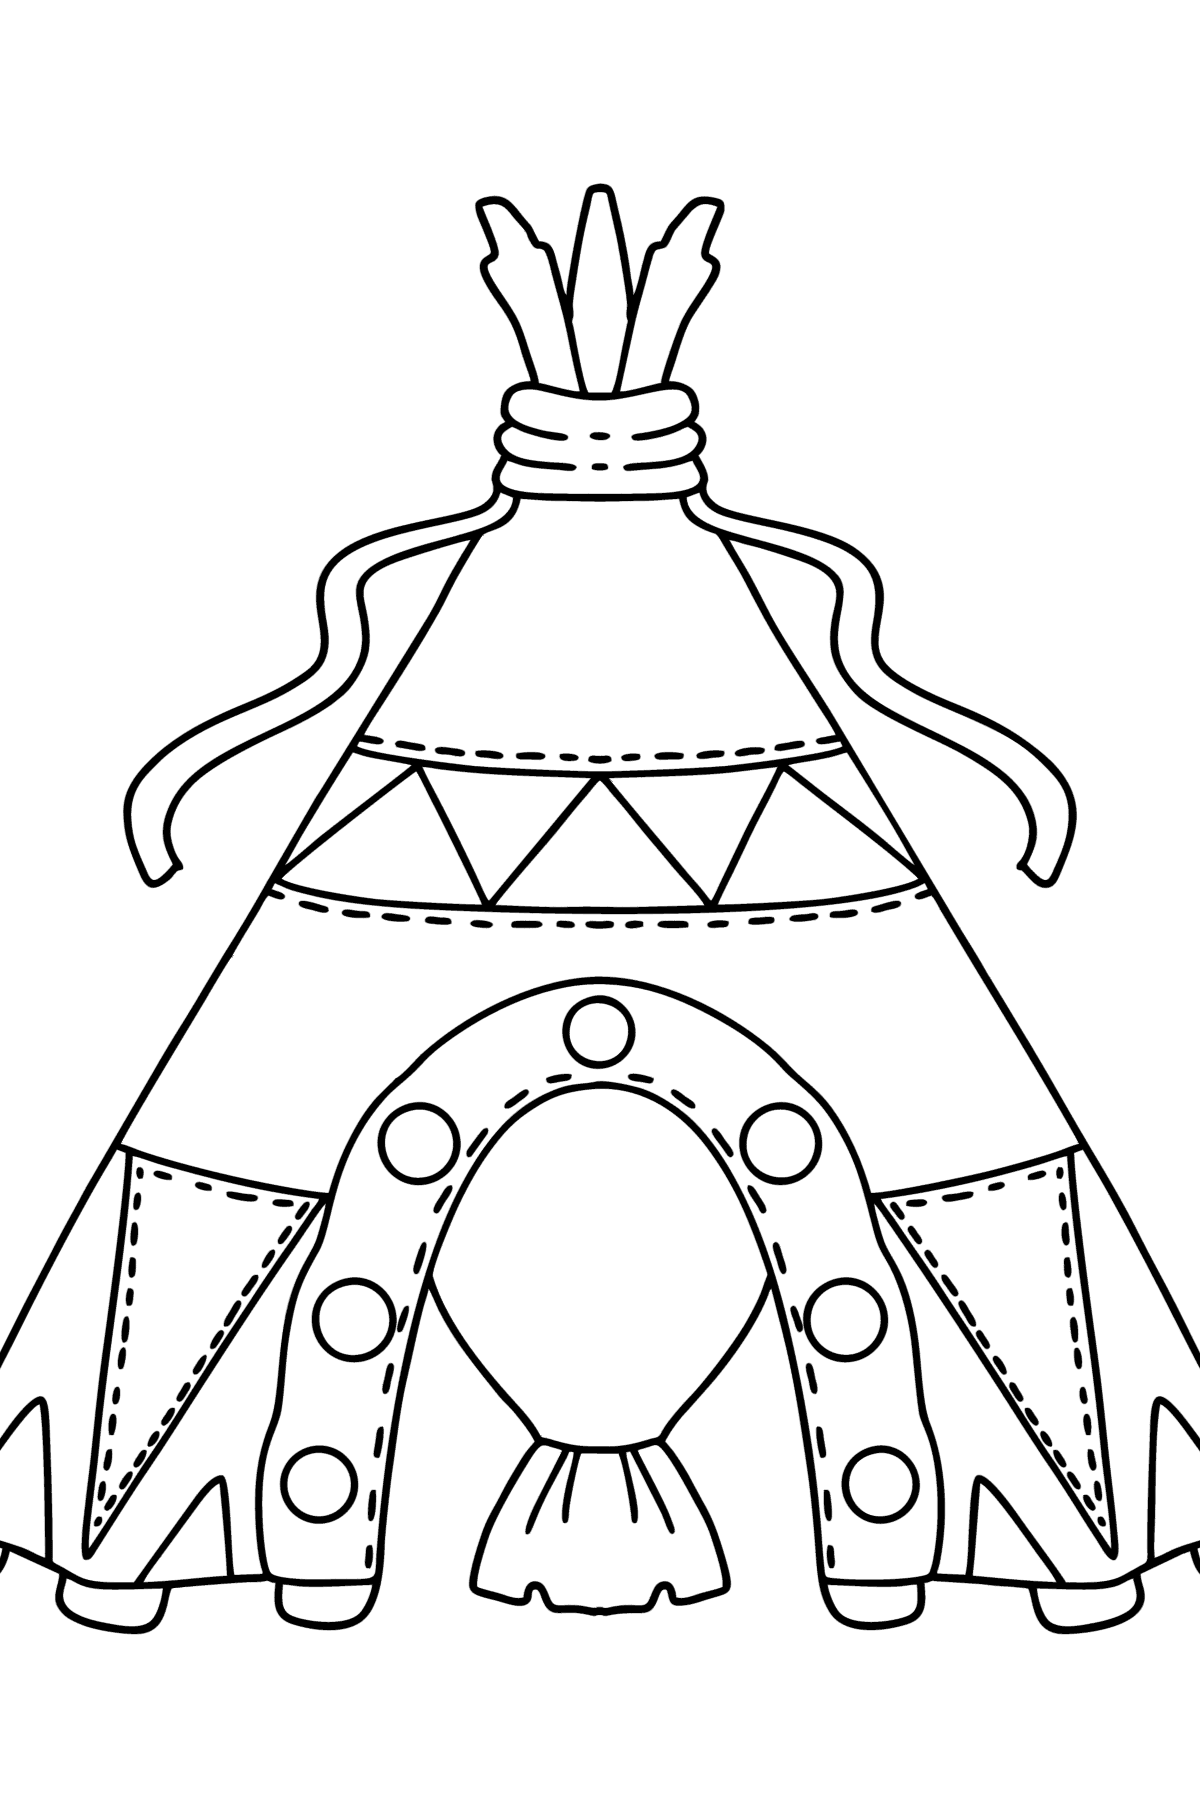 Tepee coloring page - Coloring Pages for Kids